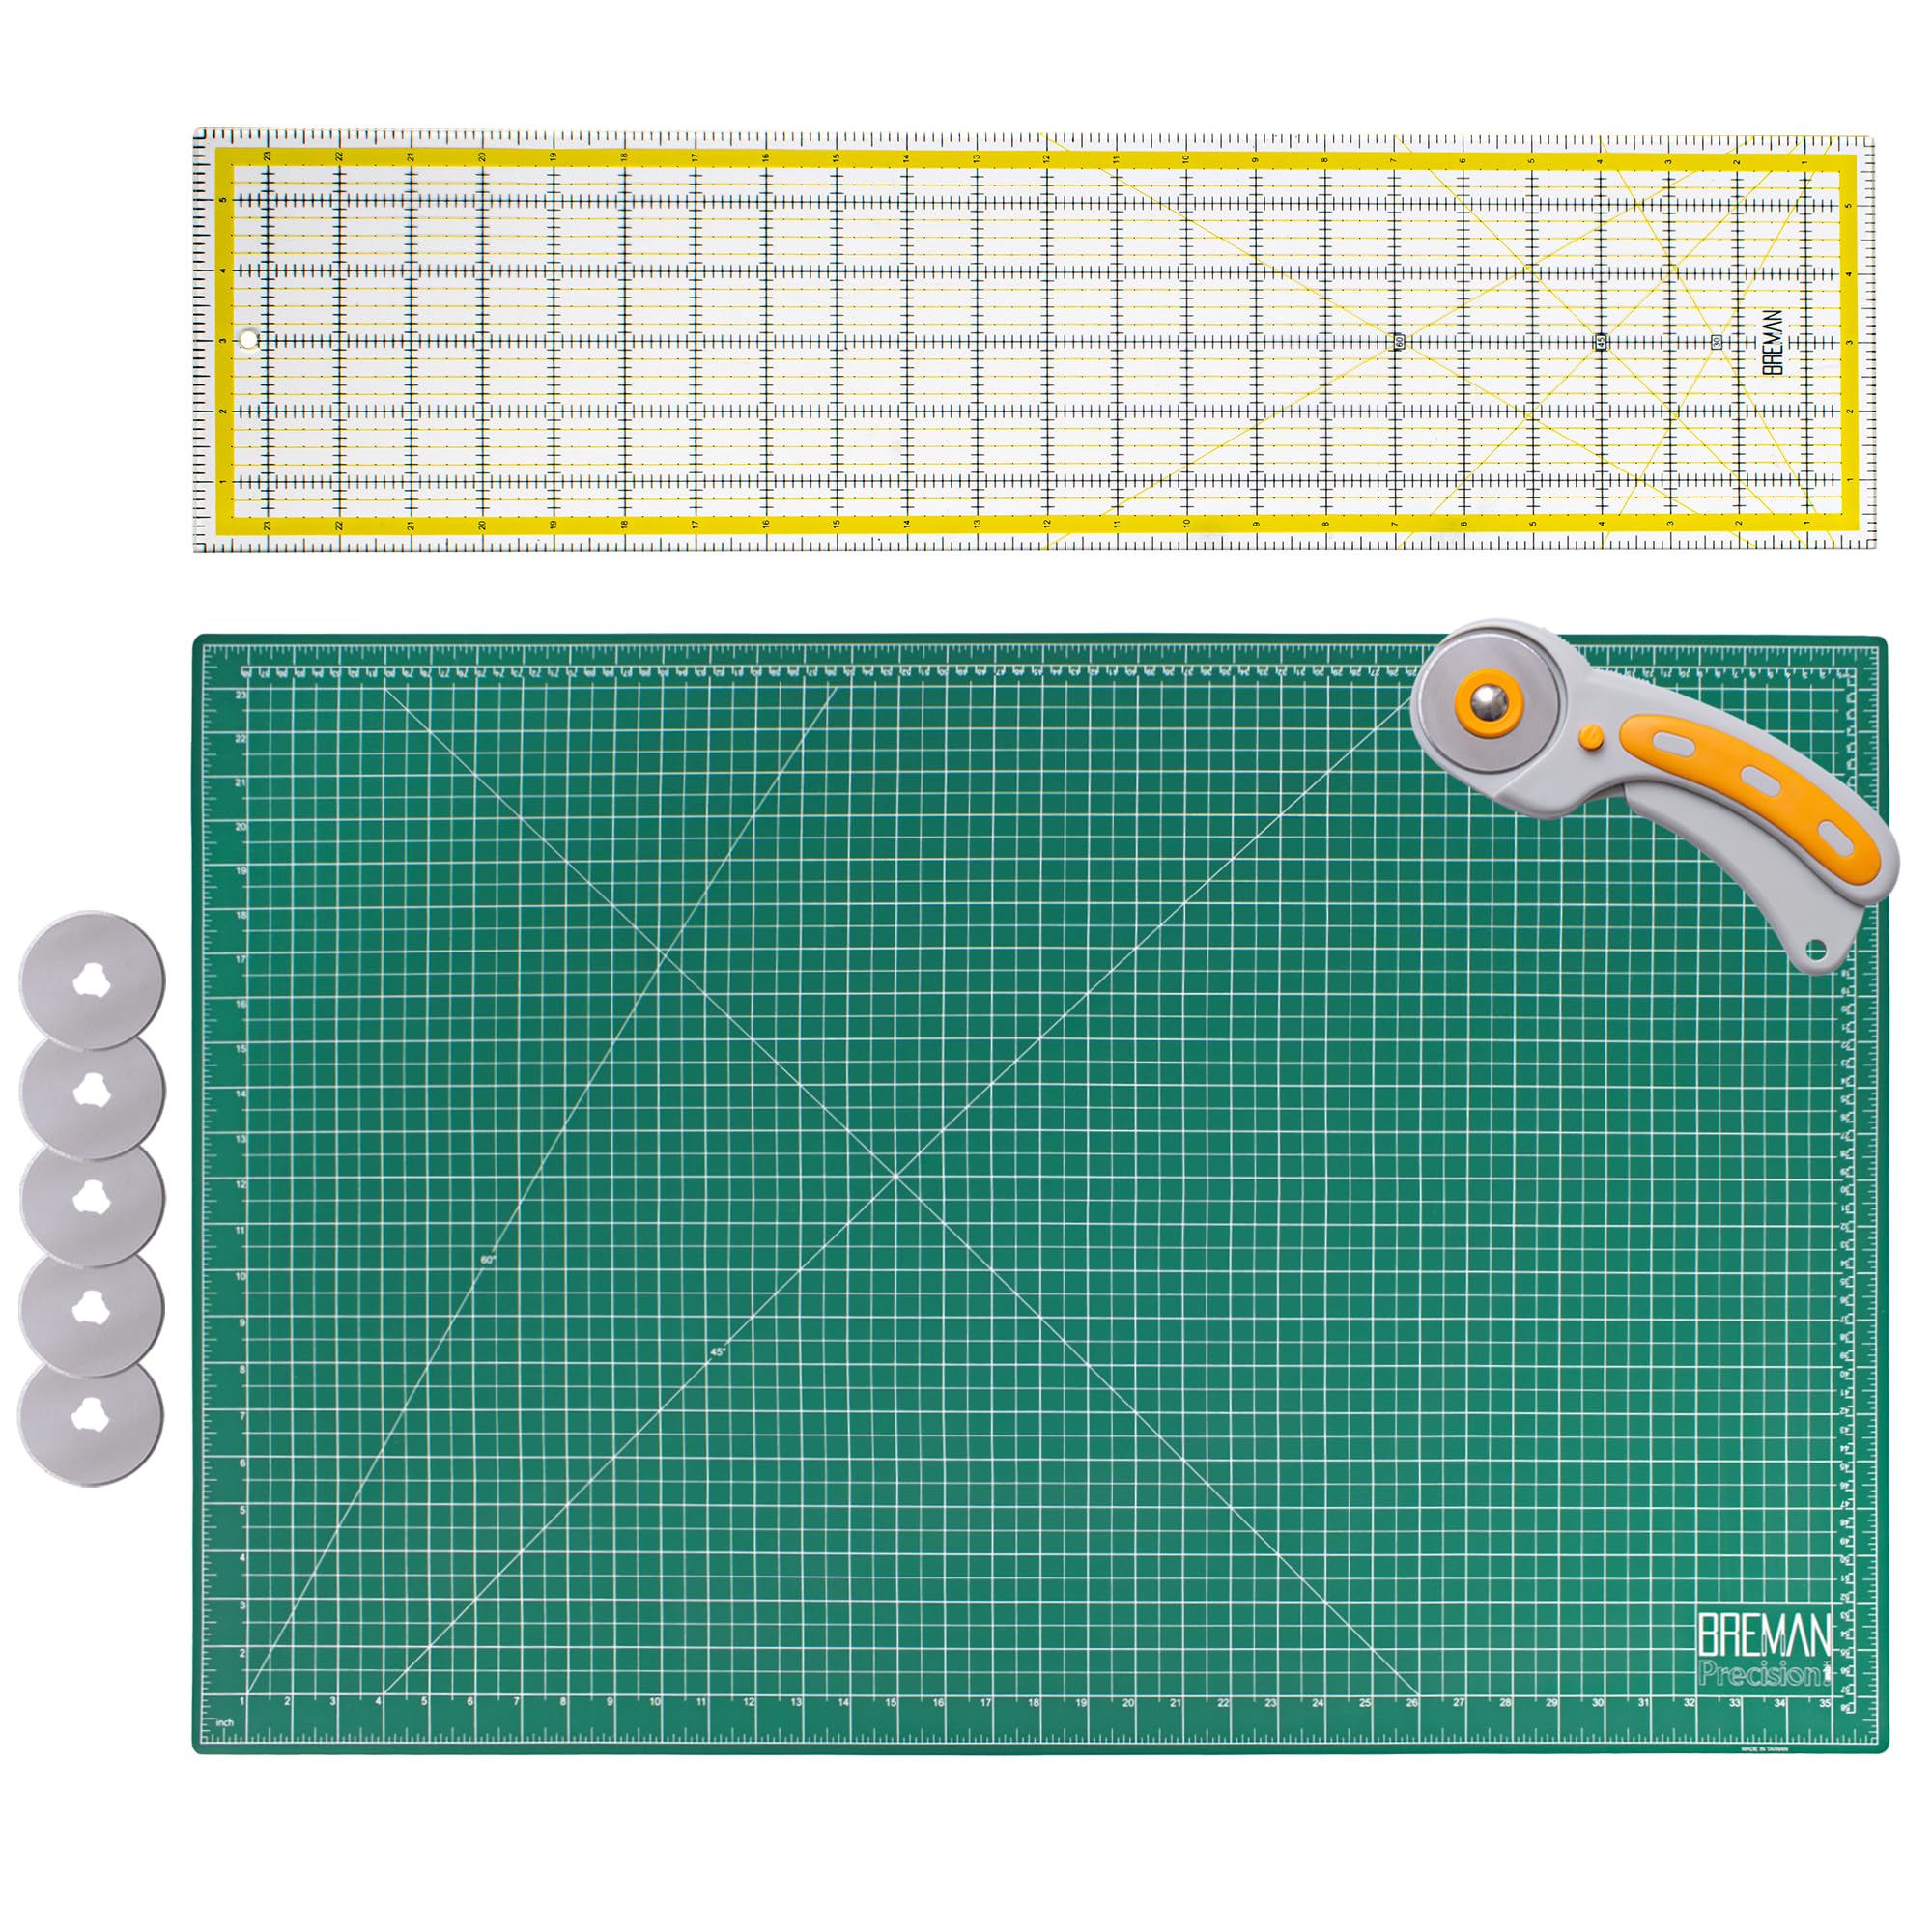 WA Portman Rotary Cutter Set & Cutting Mat for Sewing - 45mm Rotary Cutter for Fabric & 5 Blades - 24x36 In Fabric Cutting Mat - 6x24 In Acrylic Ruler for Cutting Fabric - Rotary Cutter and Mat Set